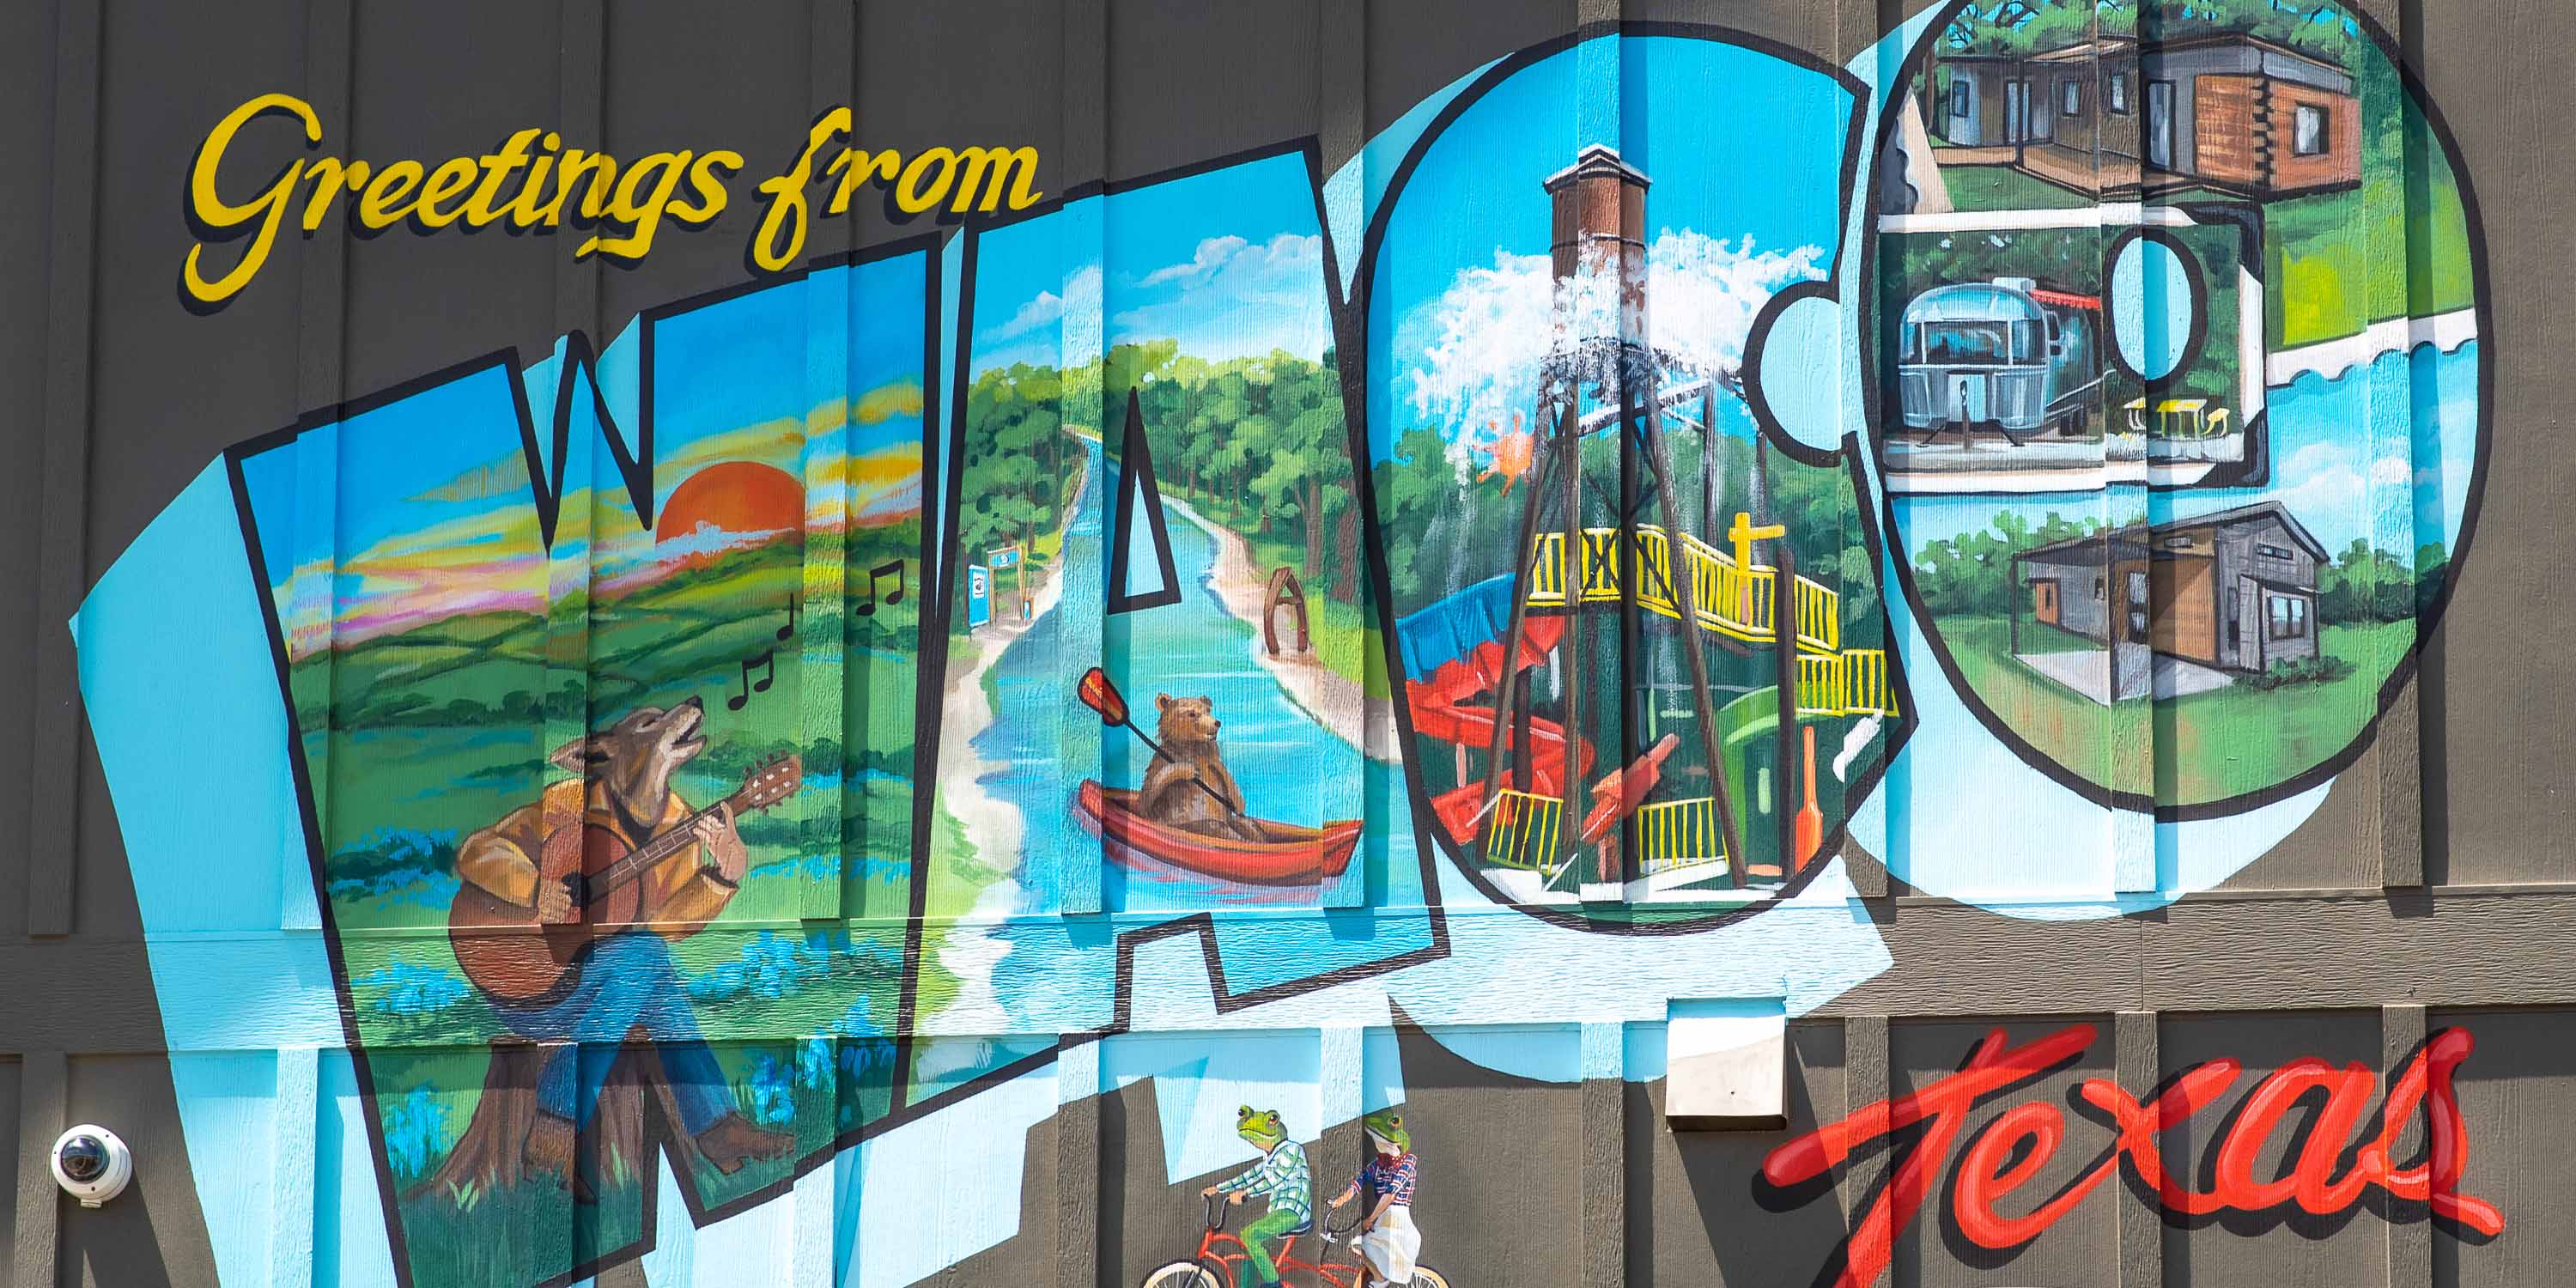 A mural at Camp Fimfo Waco that says, "Greetings from Waco, Texas"